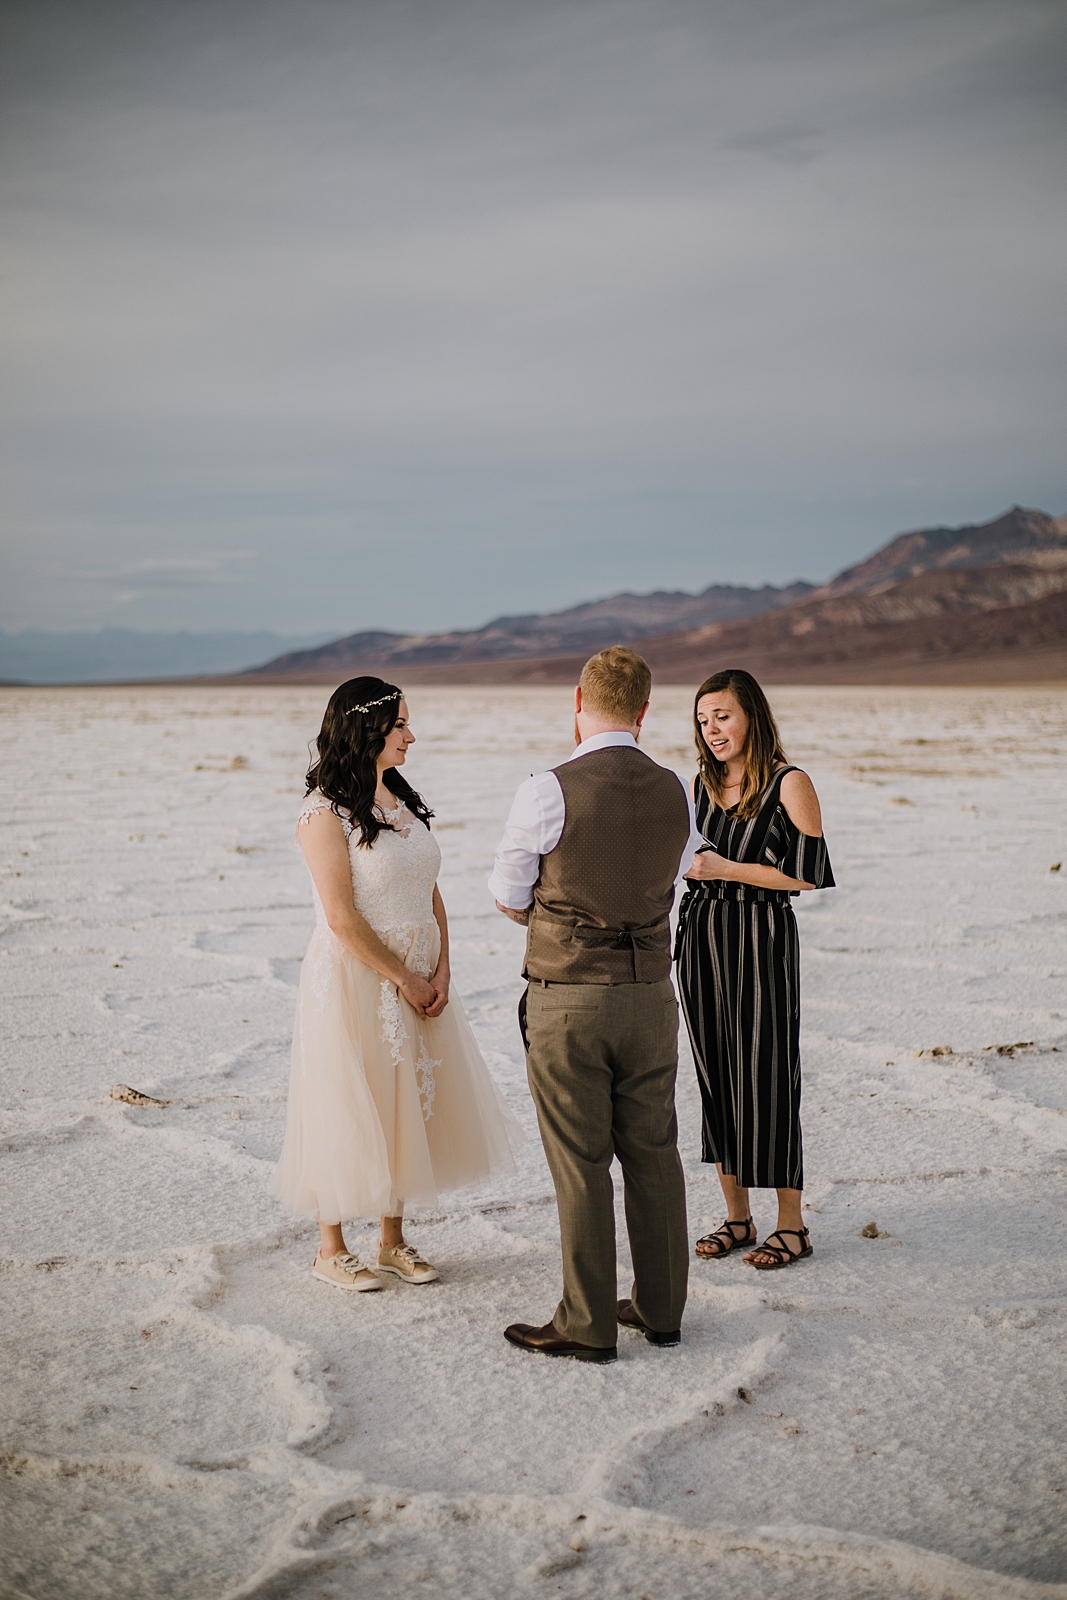 salt flats ceremony, death valley national park elopement, elope in death valley, badwater basin elopement, hiking in death valley national park, sunset at badwater basin